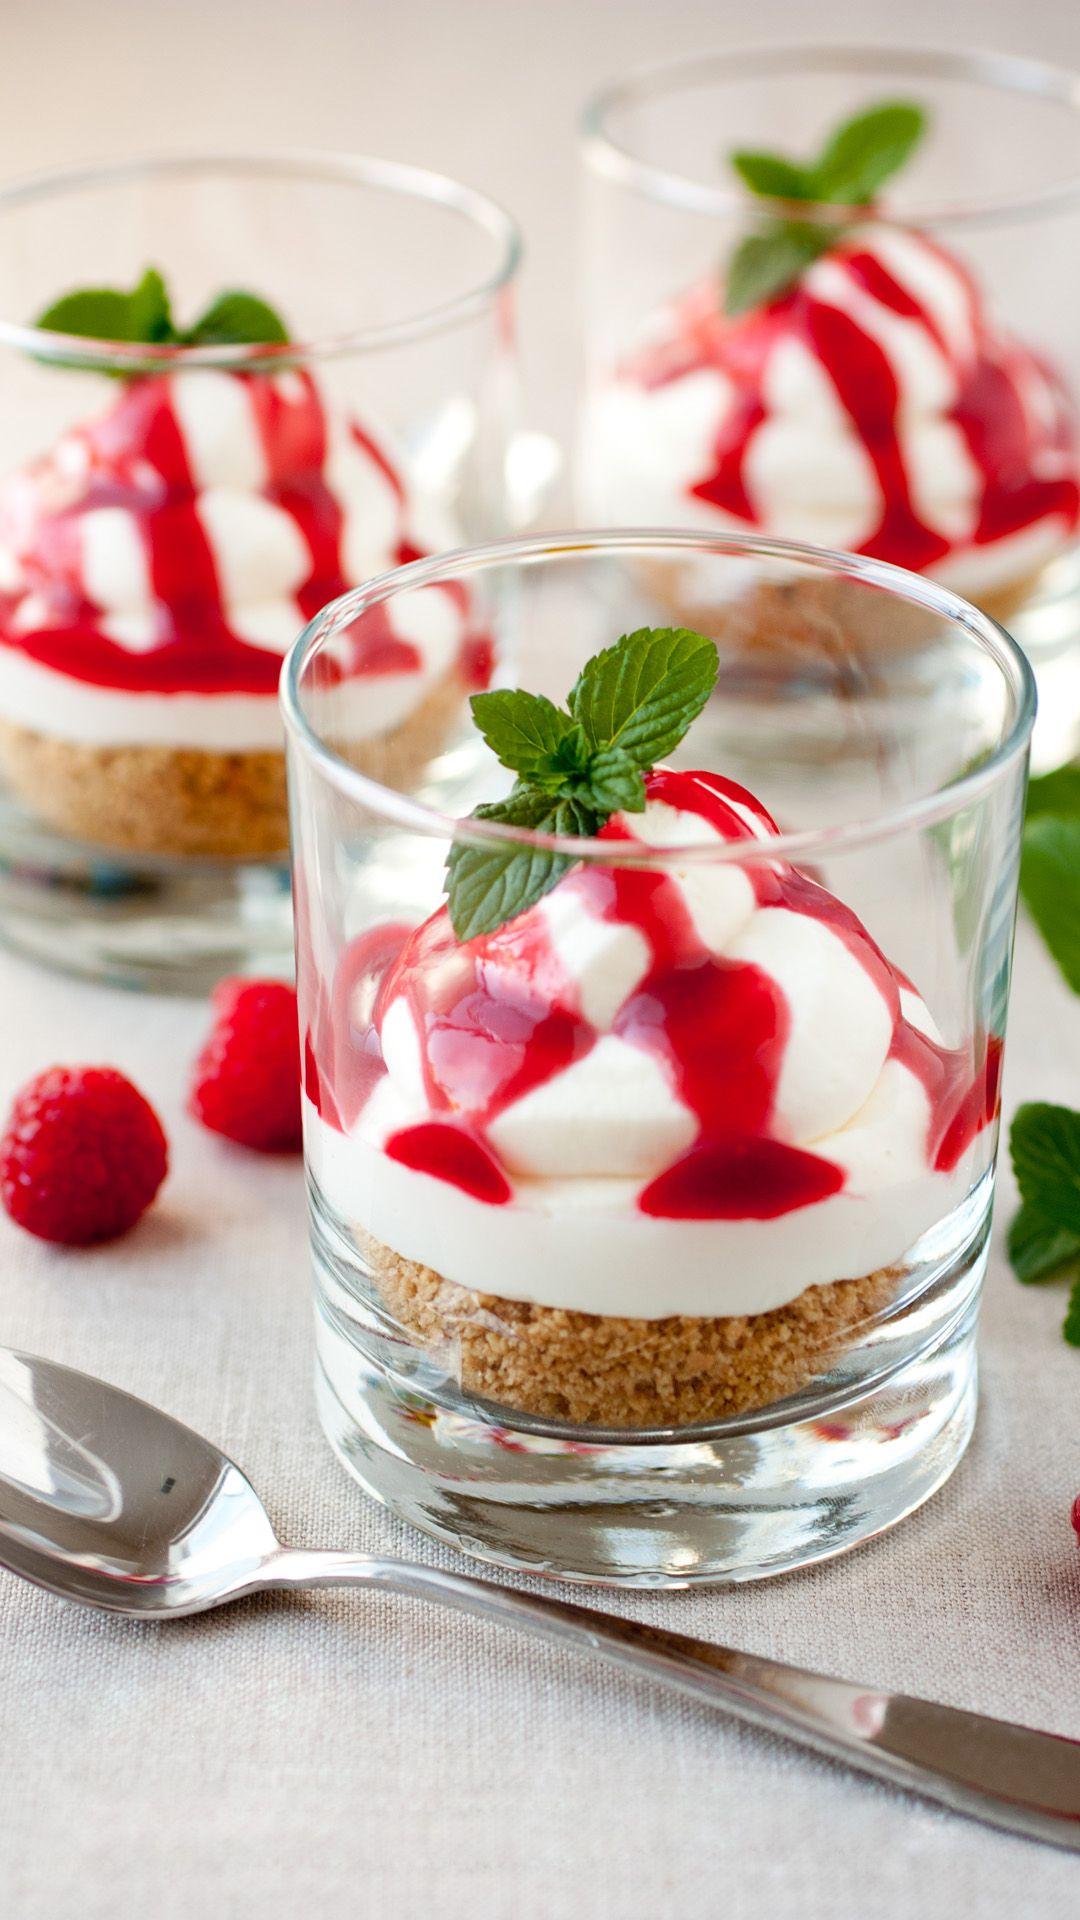 Cheesecake mousse htc one wallpaper, free and easy to download